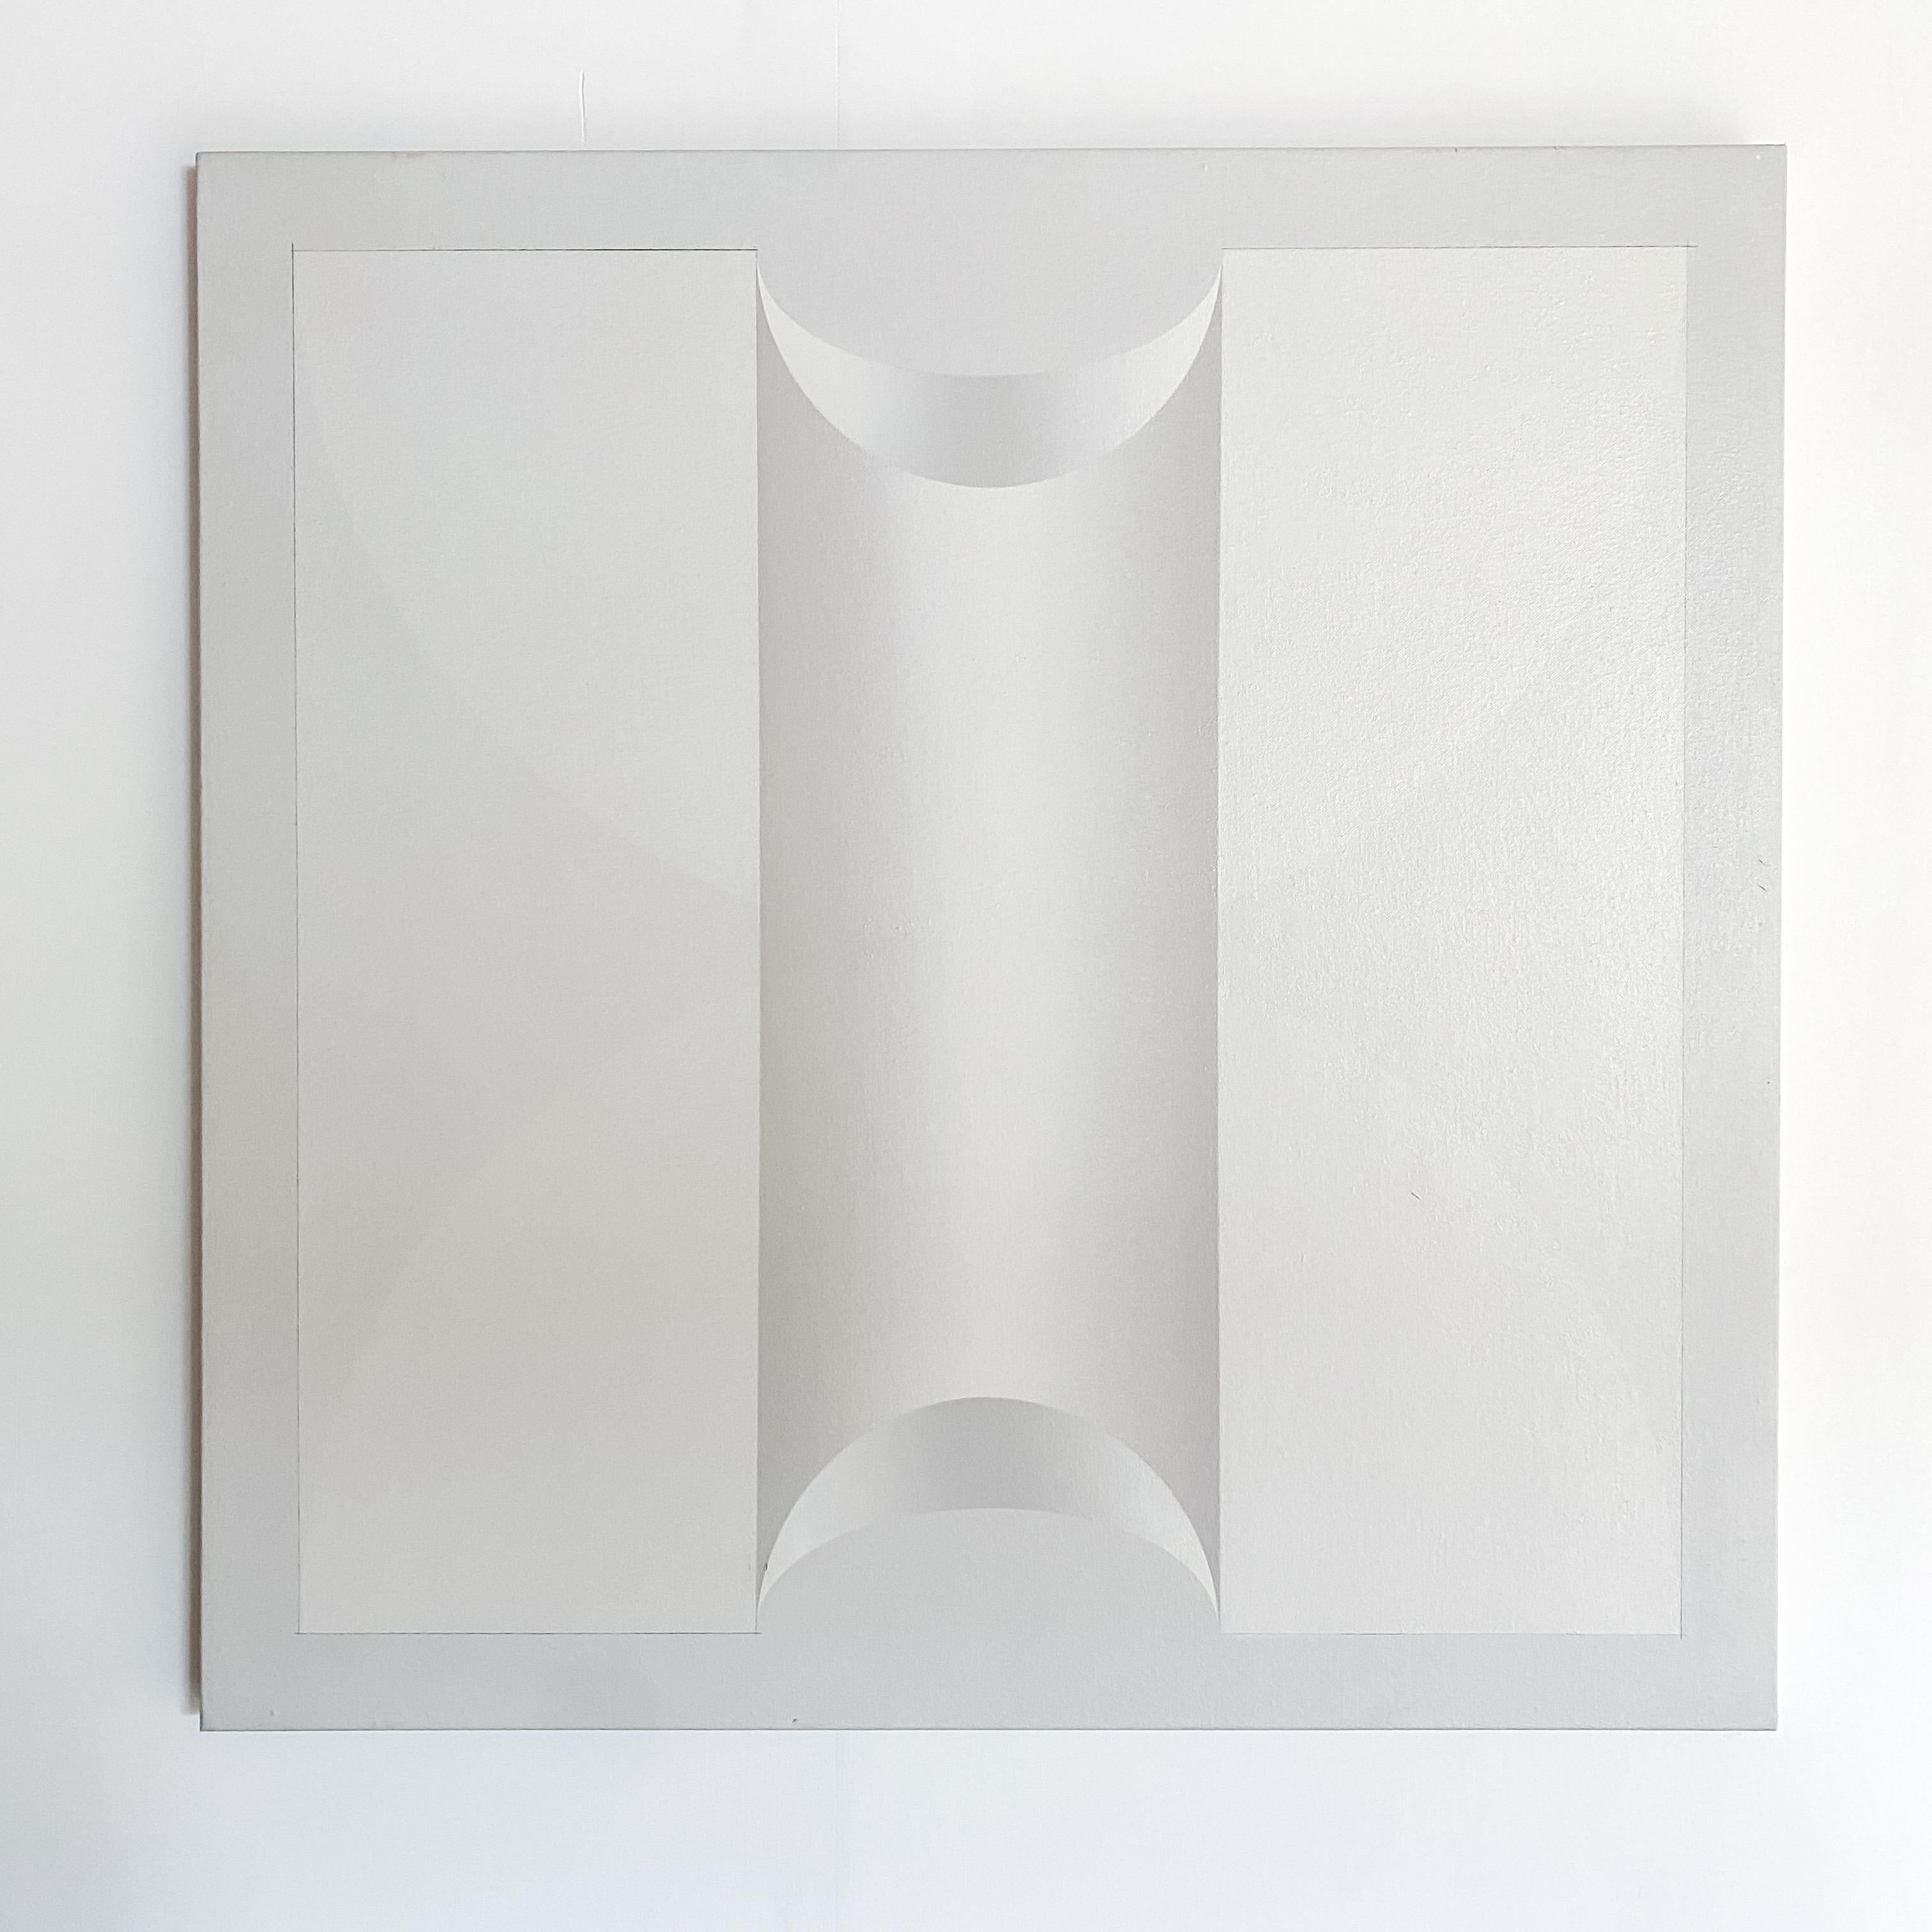 A large geometric abstract painting with the optical illusion of depth l. The subtle colour difference in tonal whites and light greys, give the painting a calm vibe while archer sane time creating an interesting composition. Dutch artist Henk van